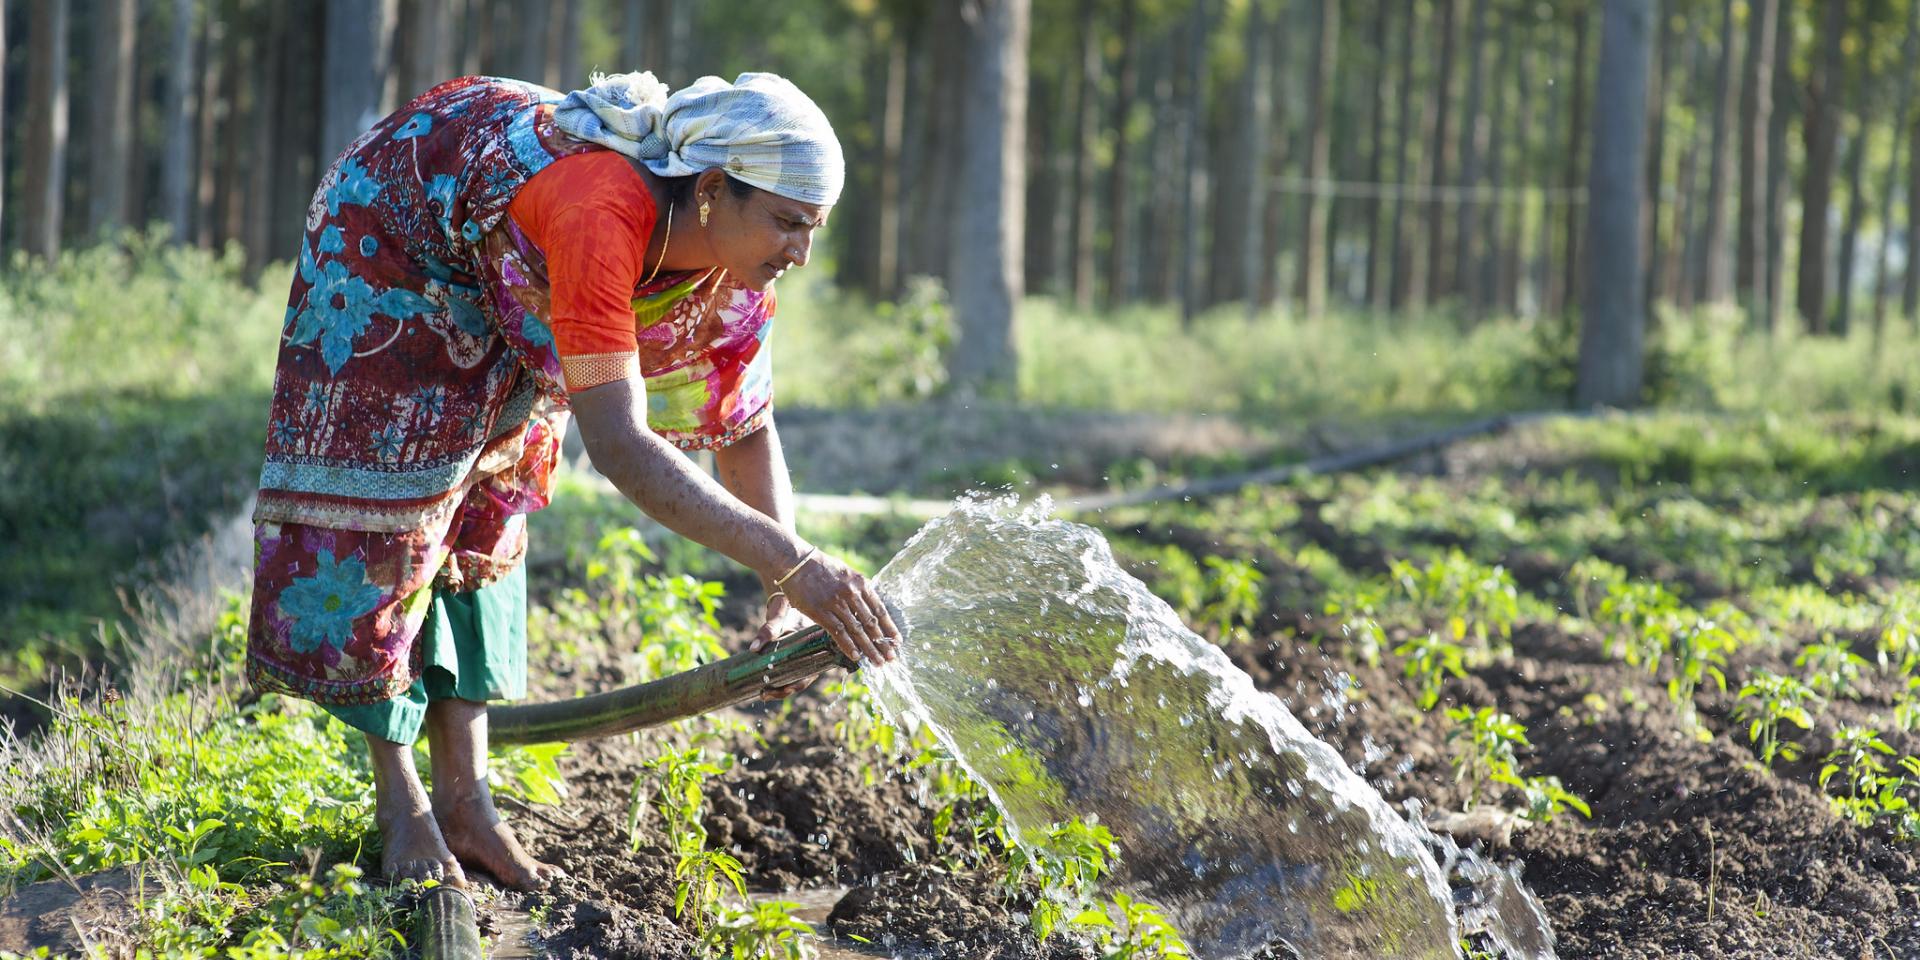 Gender and irrigation technology